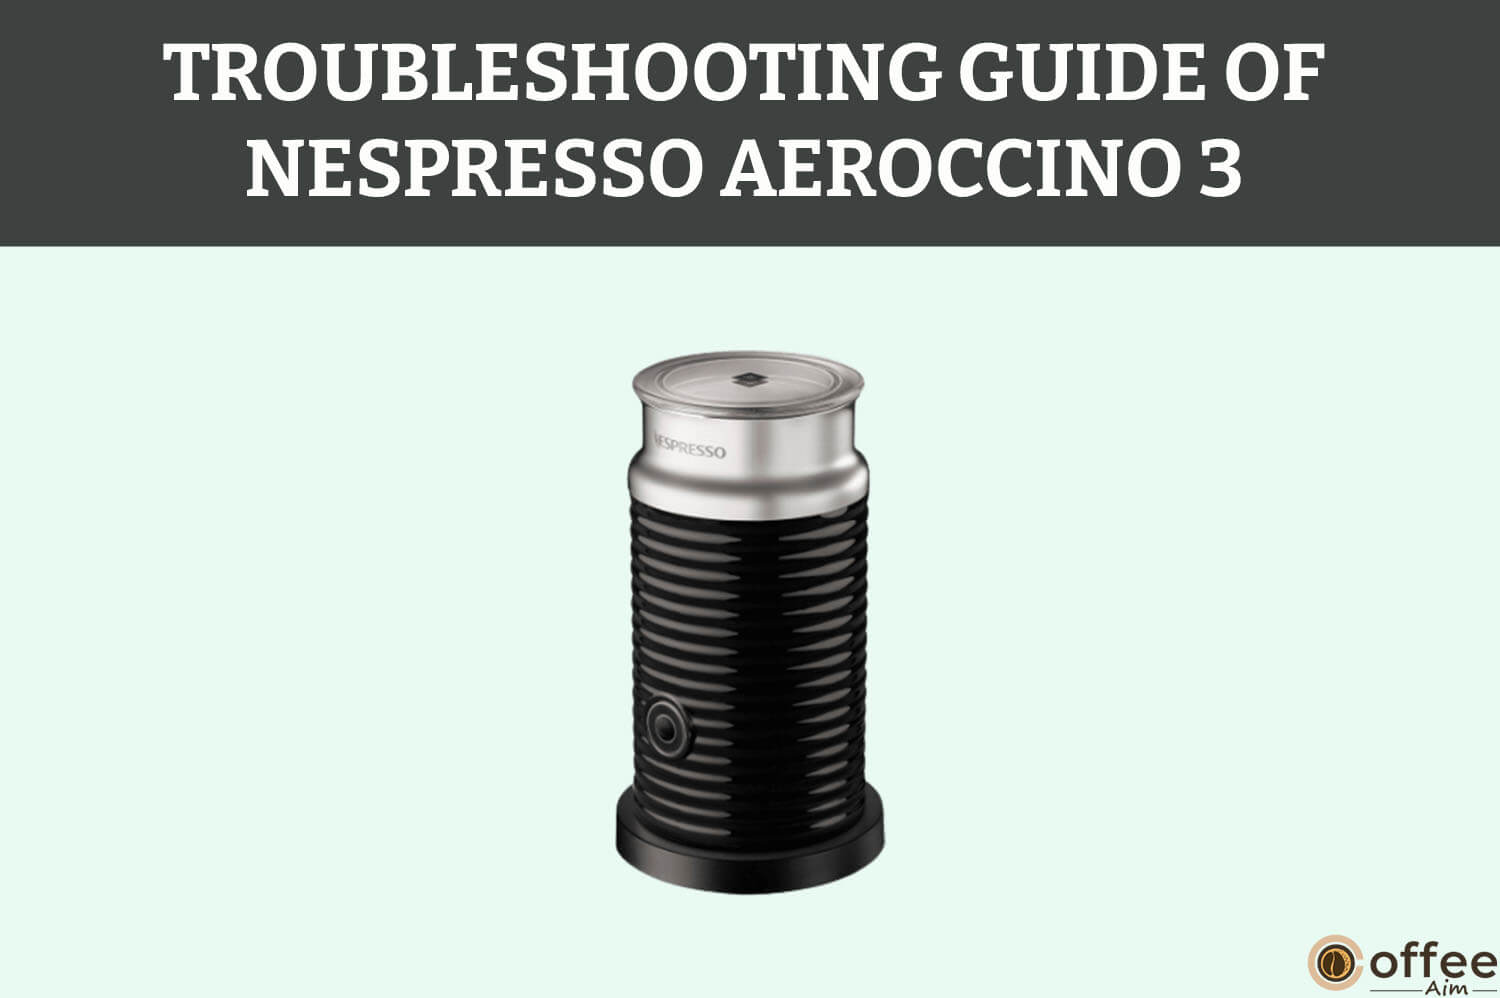 Featured image for the article "Troubleshooting of Nespresso Aeroccino 3"